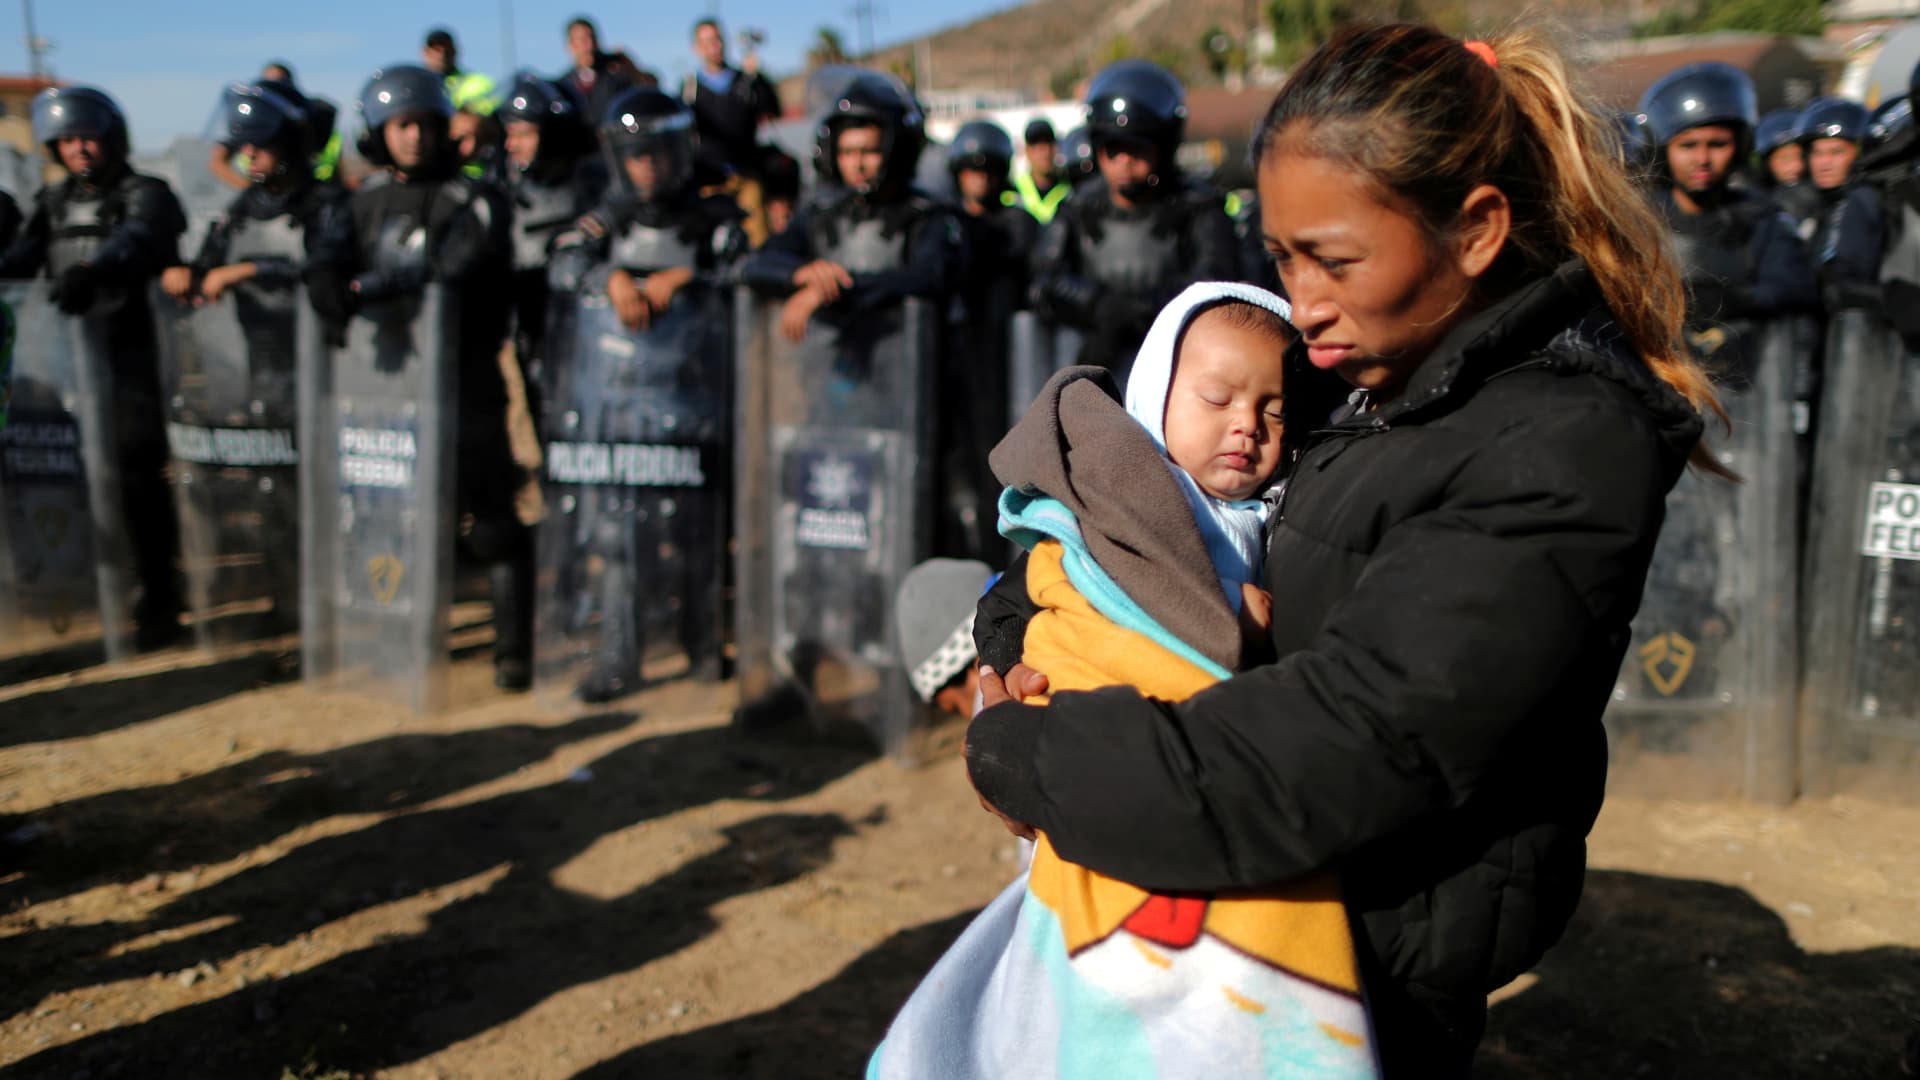 Rosa Villa, 30, and her five-month-old son Esteban from Honduras, part of a caravan of thousands traveling from Central America en route to the United States, are pushed back from the border wall between the U.S and Mexico by Mexican police in Tijuana, Mexico November 25, 2018.